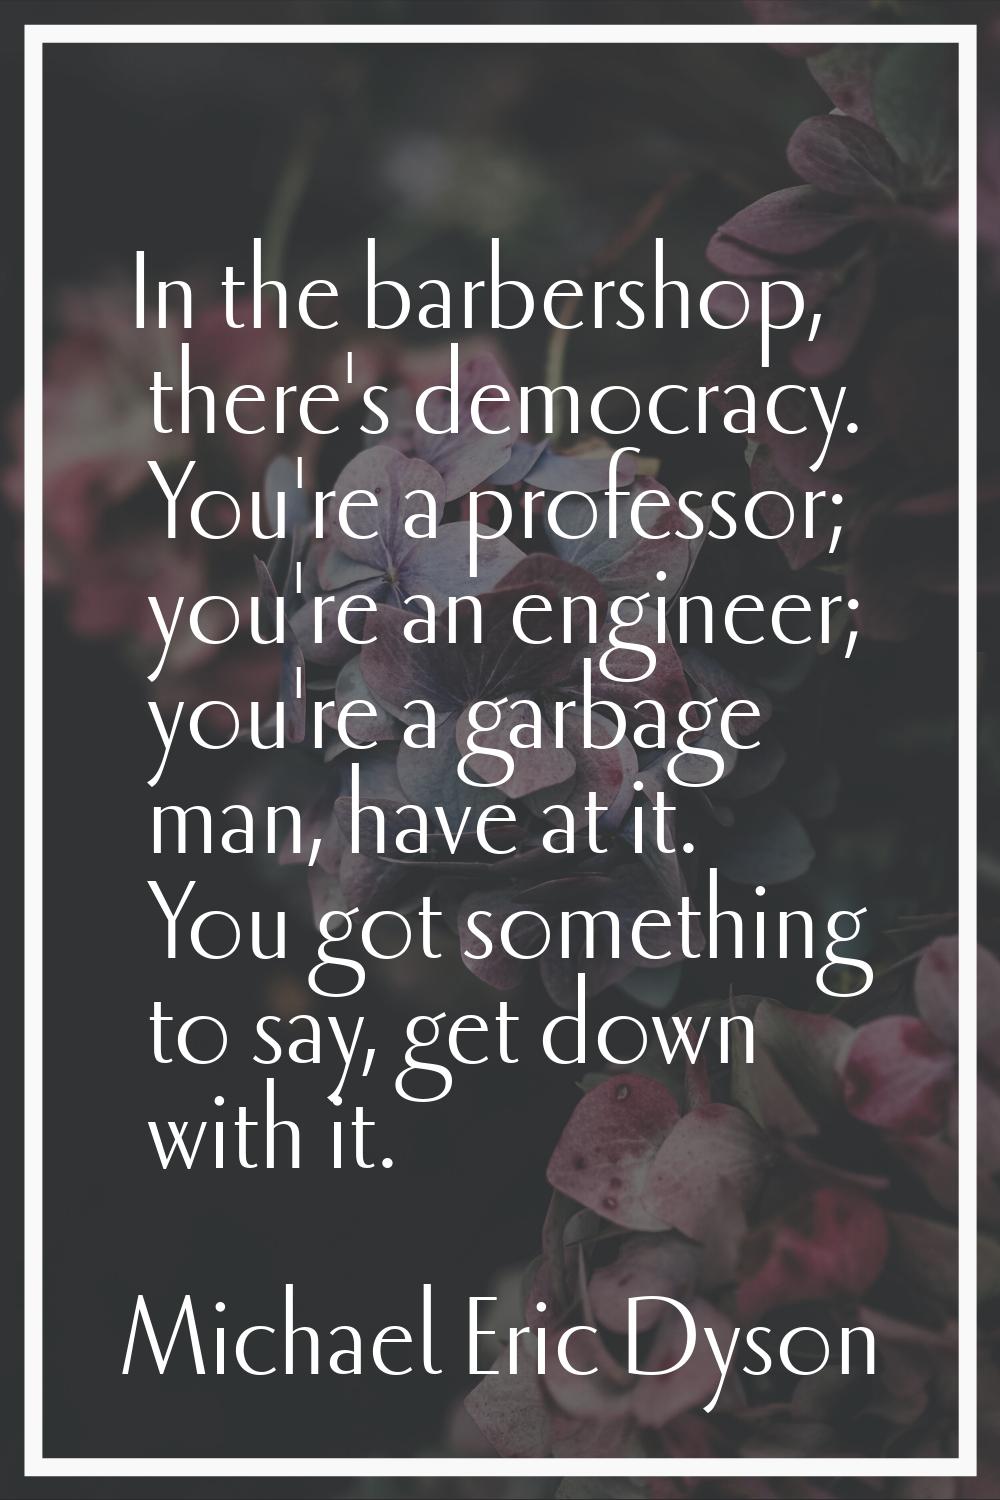 In the barbershop, there's democracy. You're a professor; you're an engineer; you're a garbage man,